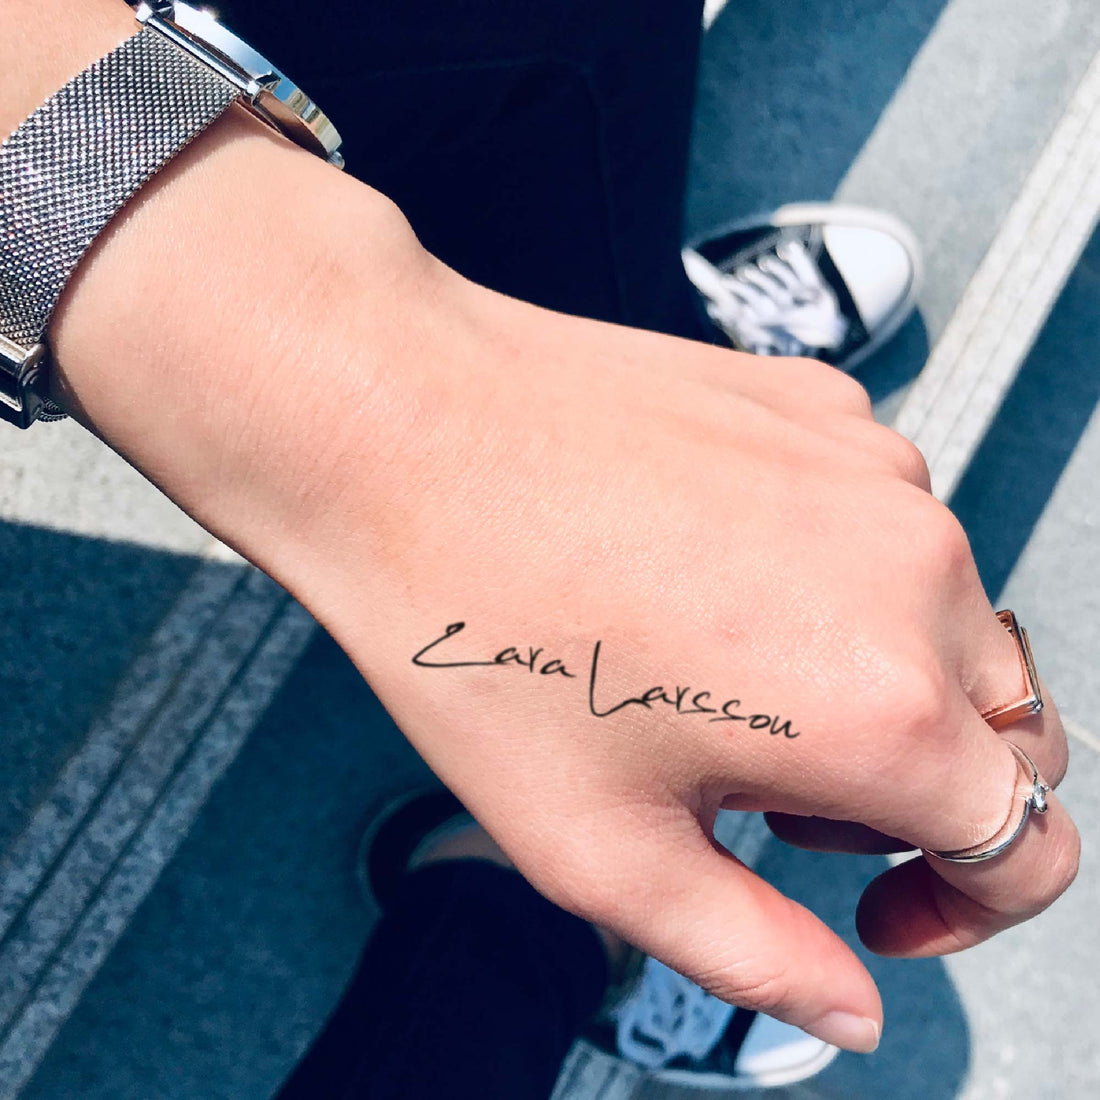 Zara Larsson custom temporary tattoo sticker design idea inspiration meanings removal arm wrist hand words font name signature calligraphy lyrics tour concert outfits merch accessory gift souvenir costumes wear dress up code